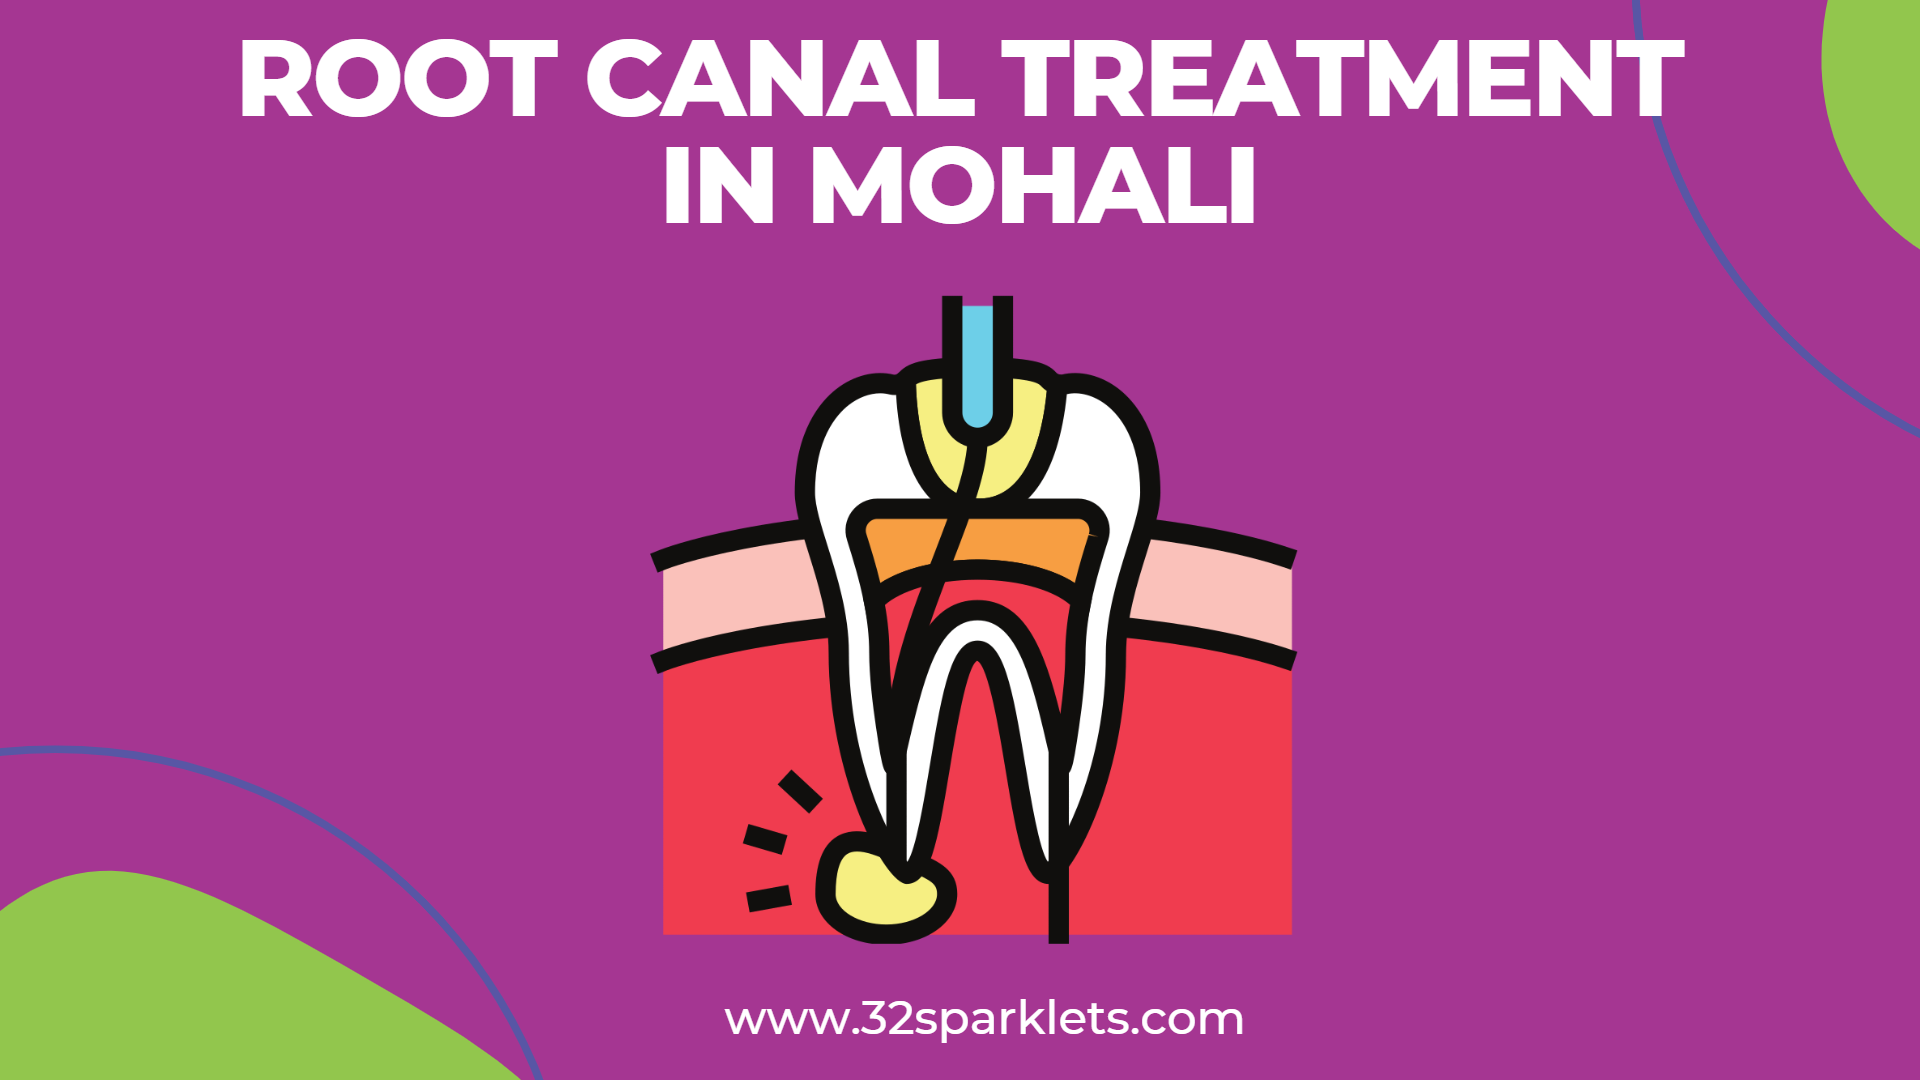 ROOT CANAL TREATMENT, Best dentist in Mohali, rct specialist in Mohali, dentist near me